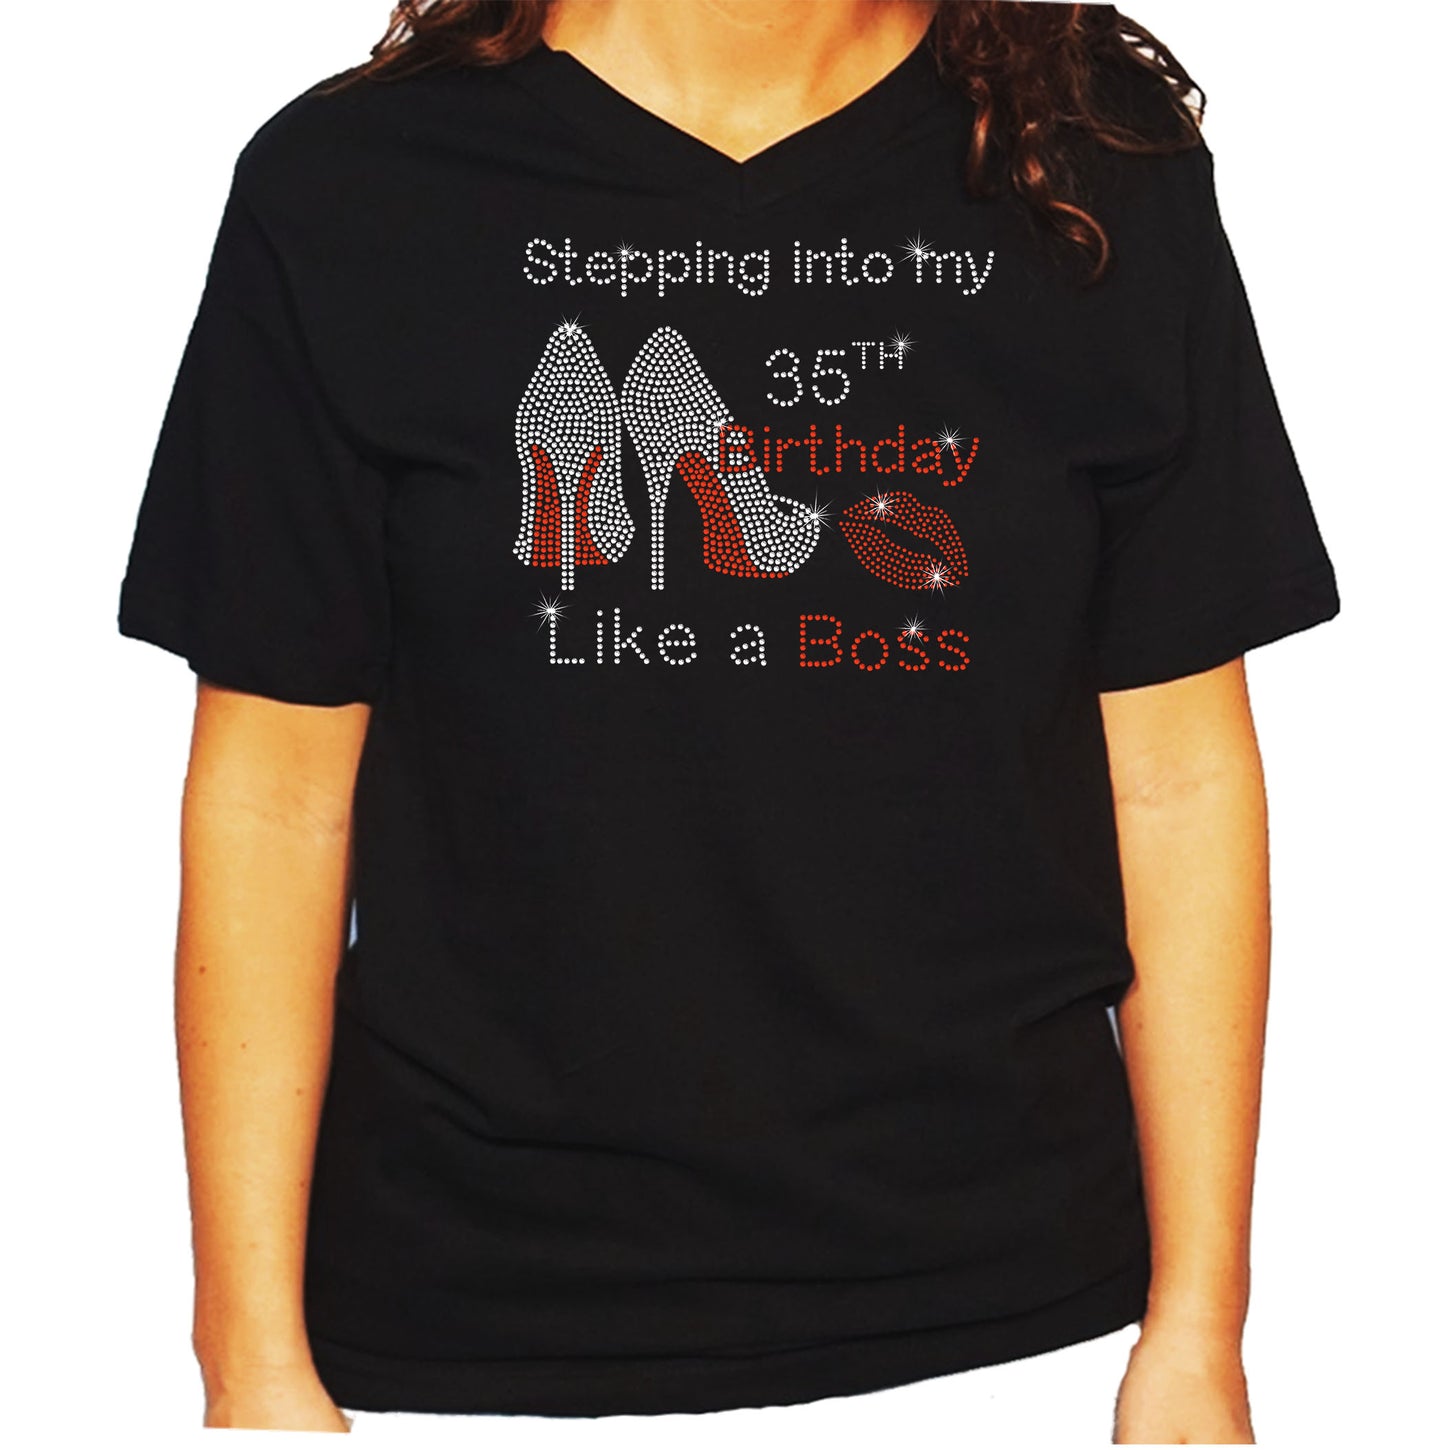 Women's/Unisex Rhinestone T-Shirt with Stepping into My Birthday Like a Boss - with Heels & Lips